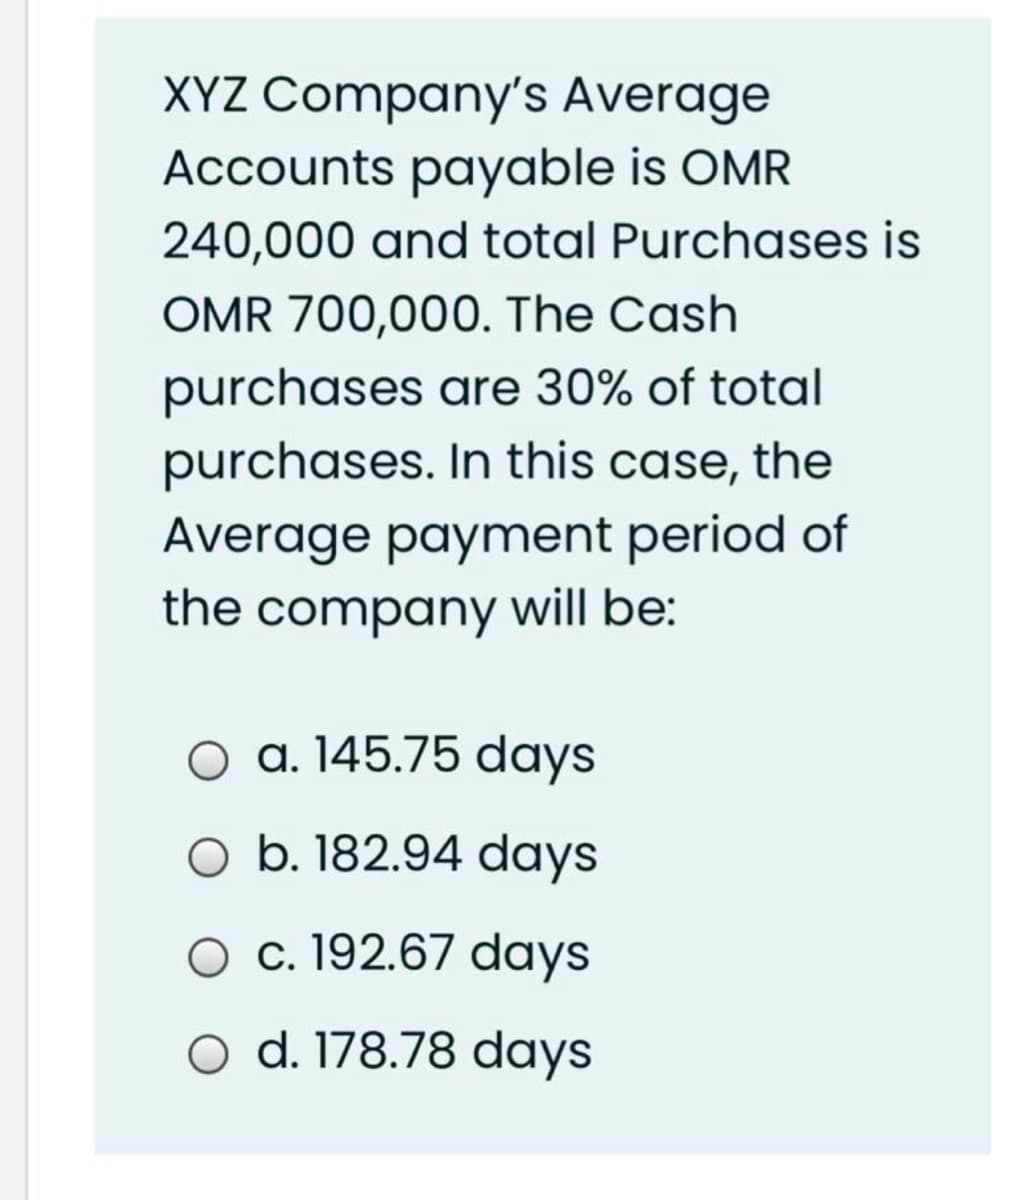 XYZ Company's Average
Accounts payable is OMR
240,000 and total Purchases is
OMR 700,000. The Cash
purchases are 30% of total
purchases. In this case, the
Average payment period of
the company will be:
O a. 145.75 days
O b. 182.94 days
O c. 192.67 days
O d. 178.78 days
